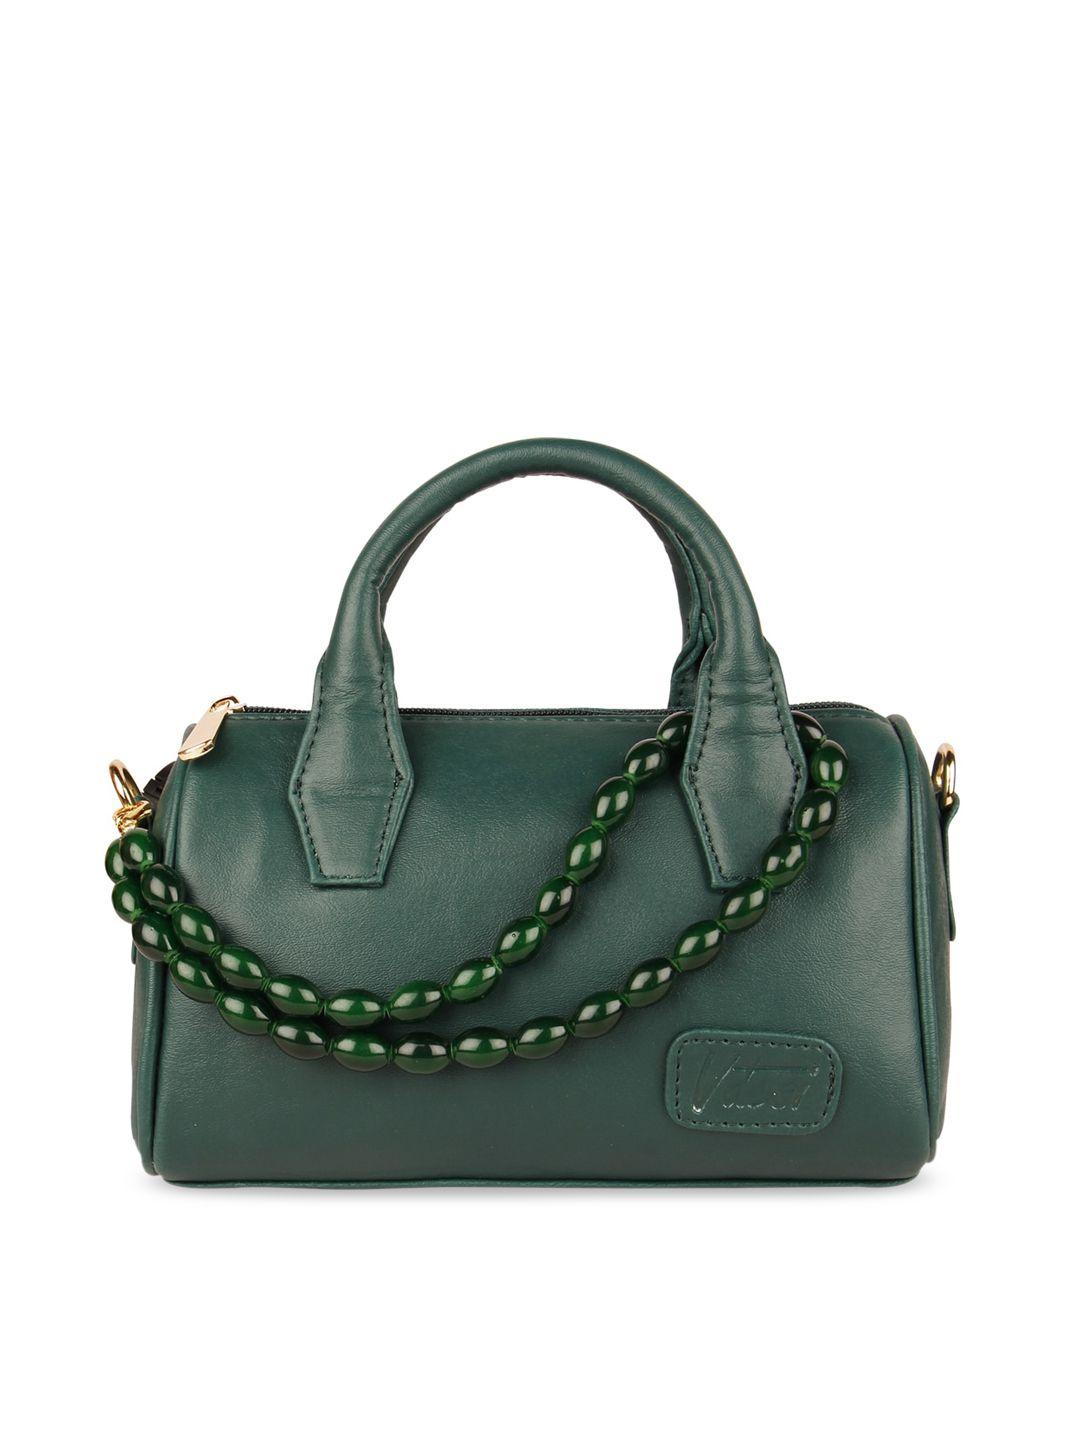 vdesi green pu structured handheld bag with tasselled